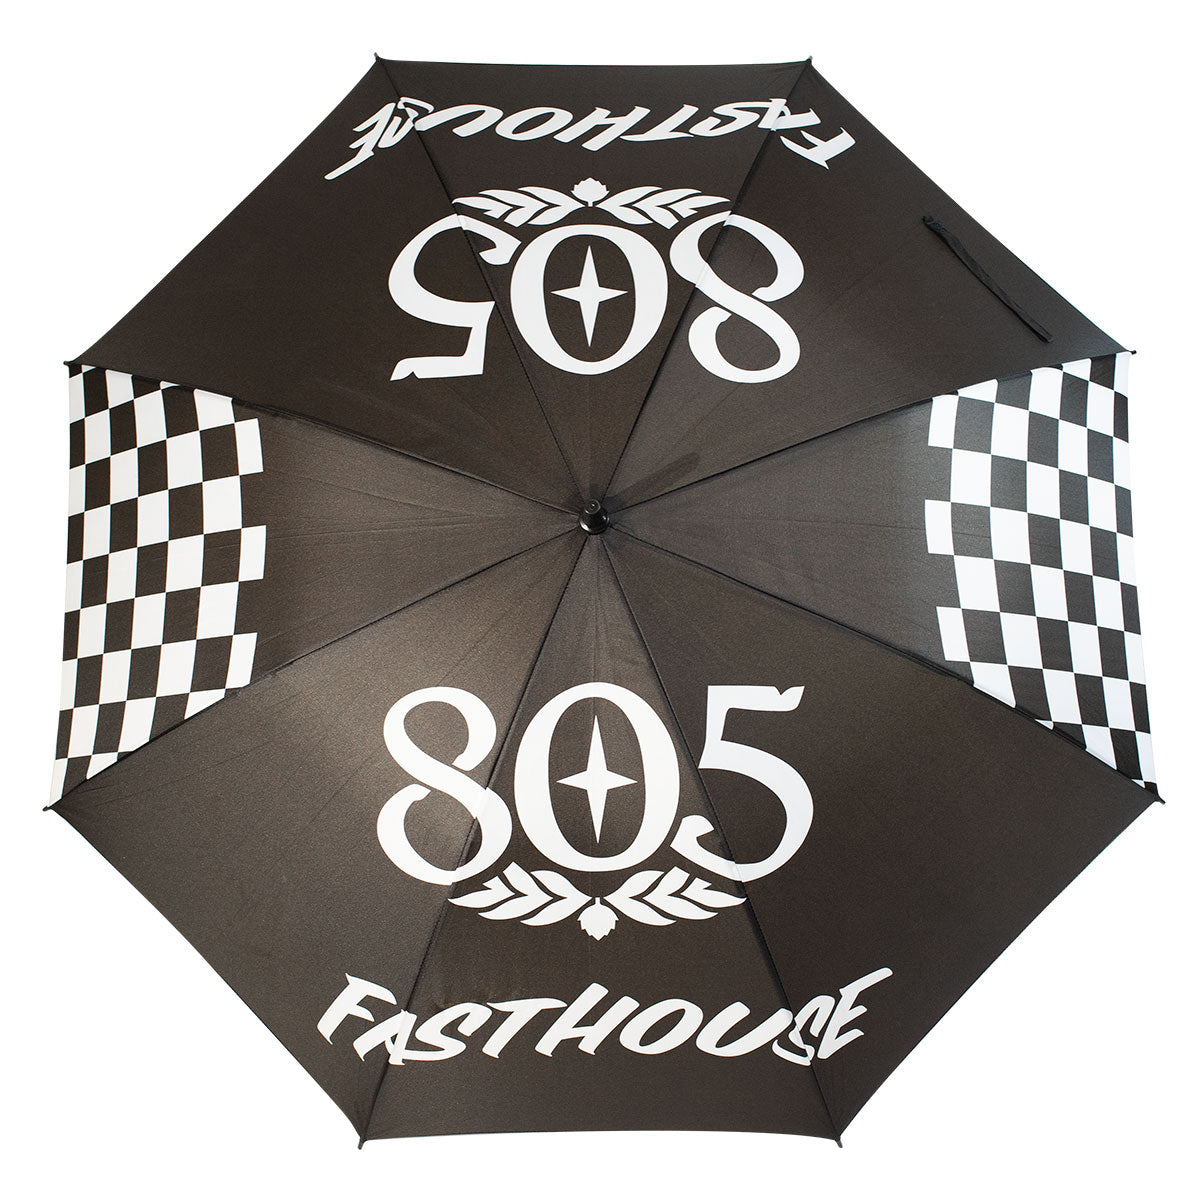 Top View- Fasthouse - 805 Beer X Fasthouse Umbrella